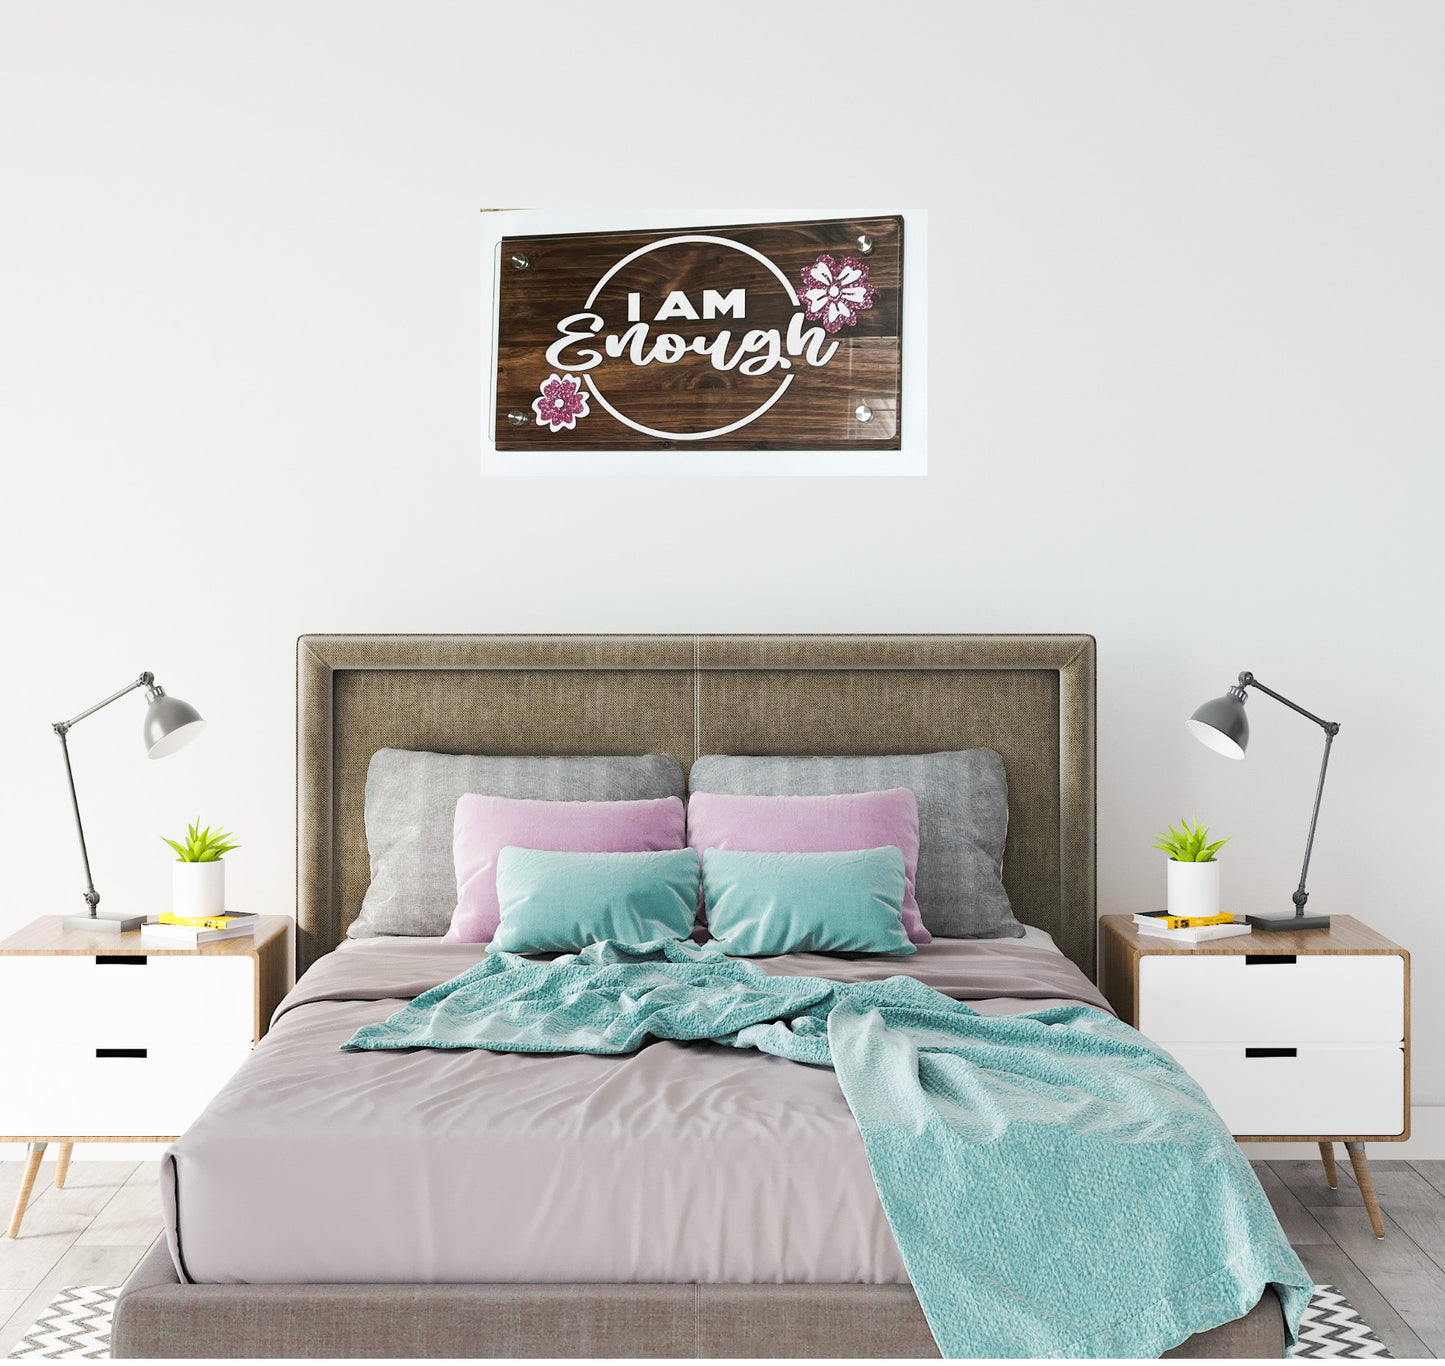 I AM Enough Inspiration Sign | Perfect for a teen | Perfect for Mother’s Day